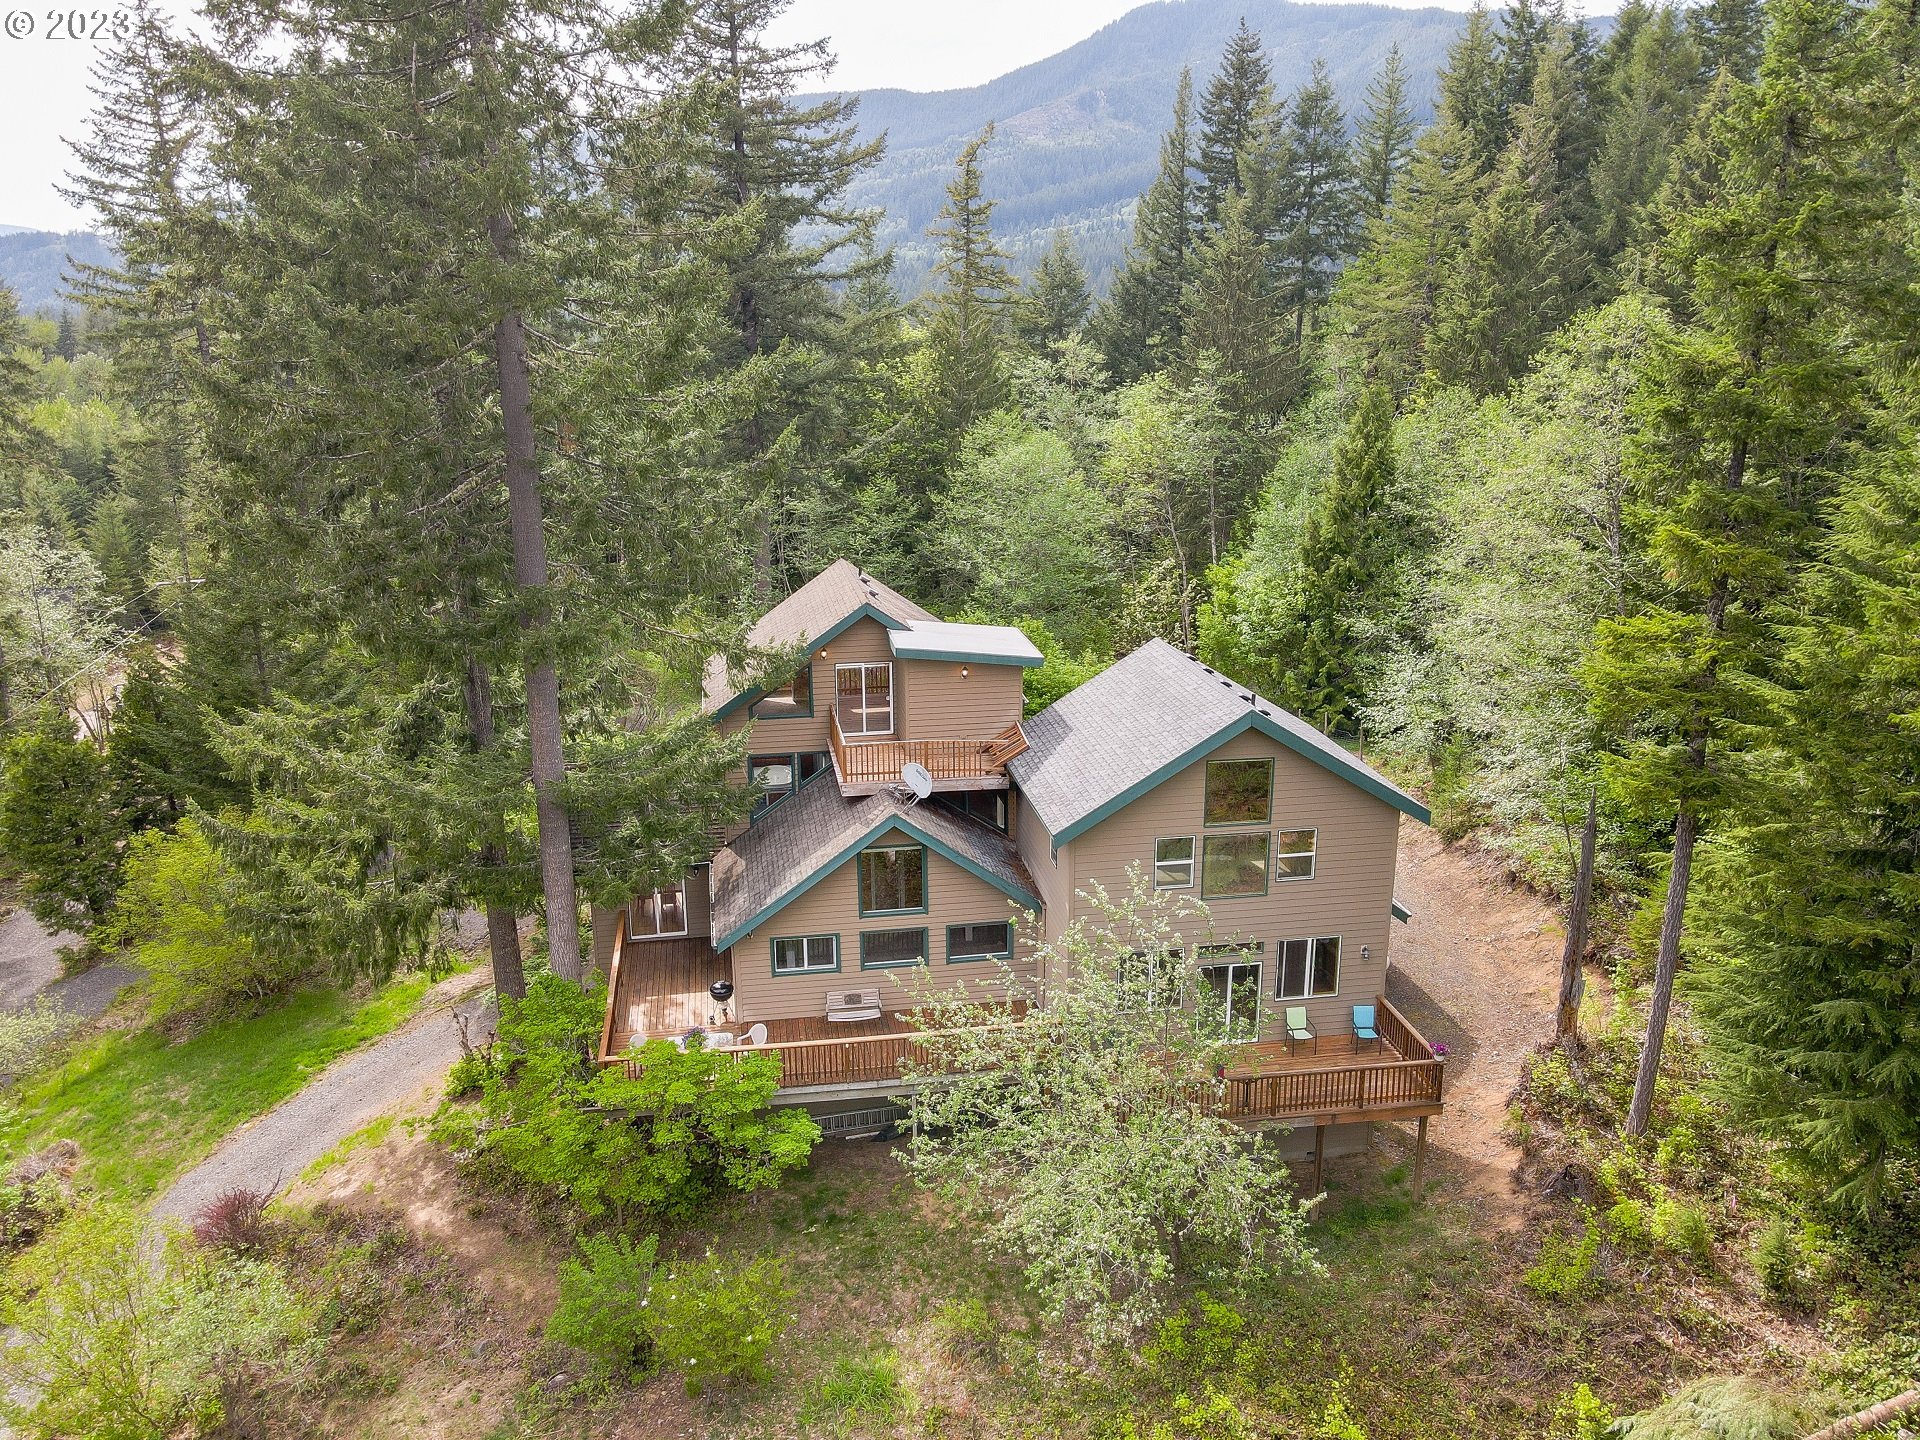 20497 E LOLO PASS RD, Rhododendron, OR 